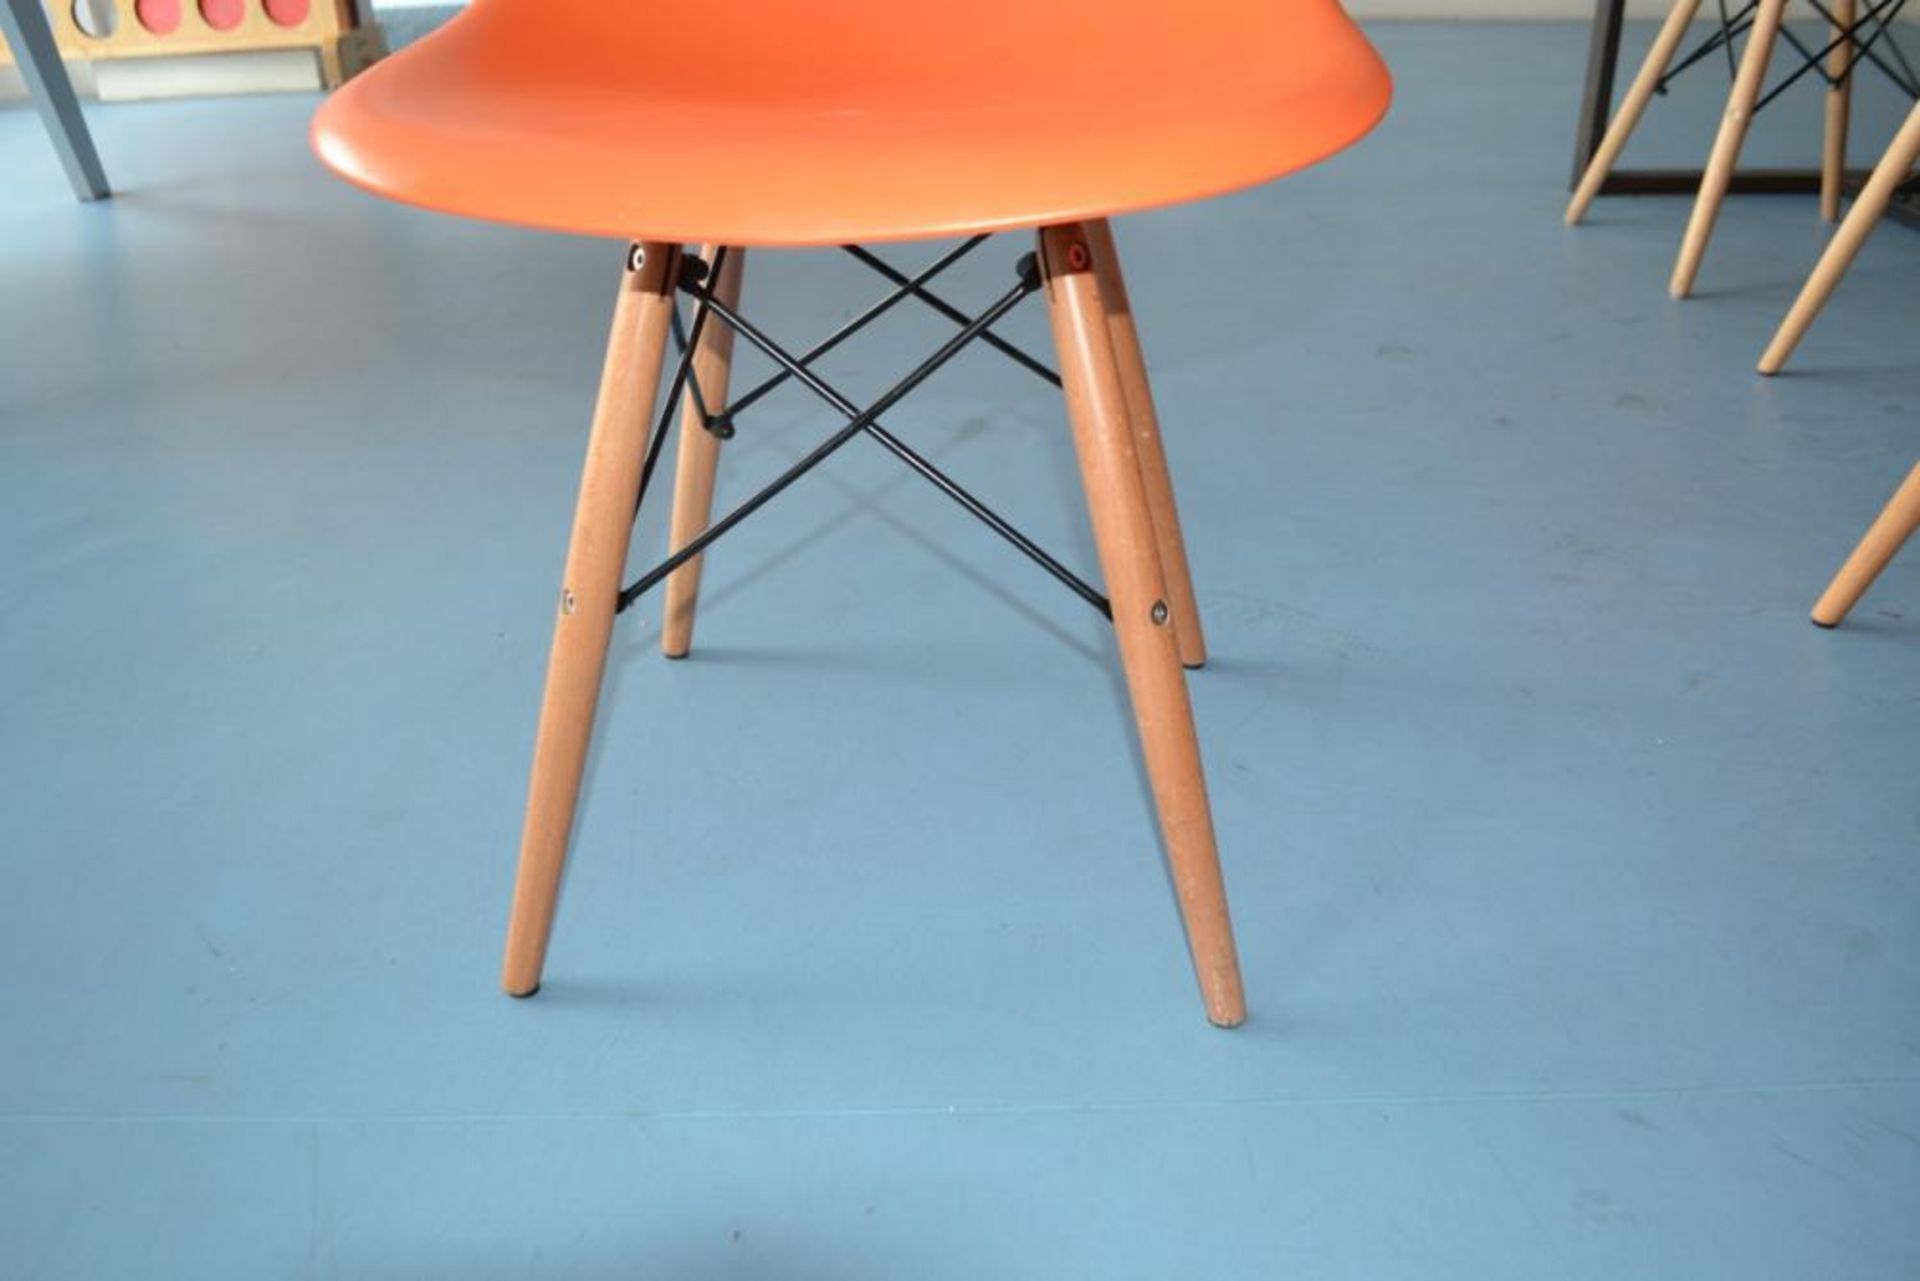 12 x Children's Red and Orange Charles and Ray Eames Style Shell Chairs - CL425 - Location: Altrinch - Image 5 of 9